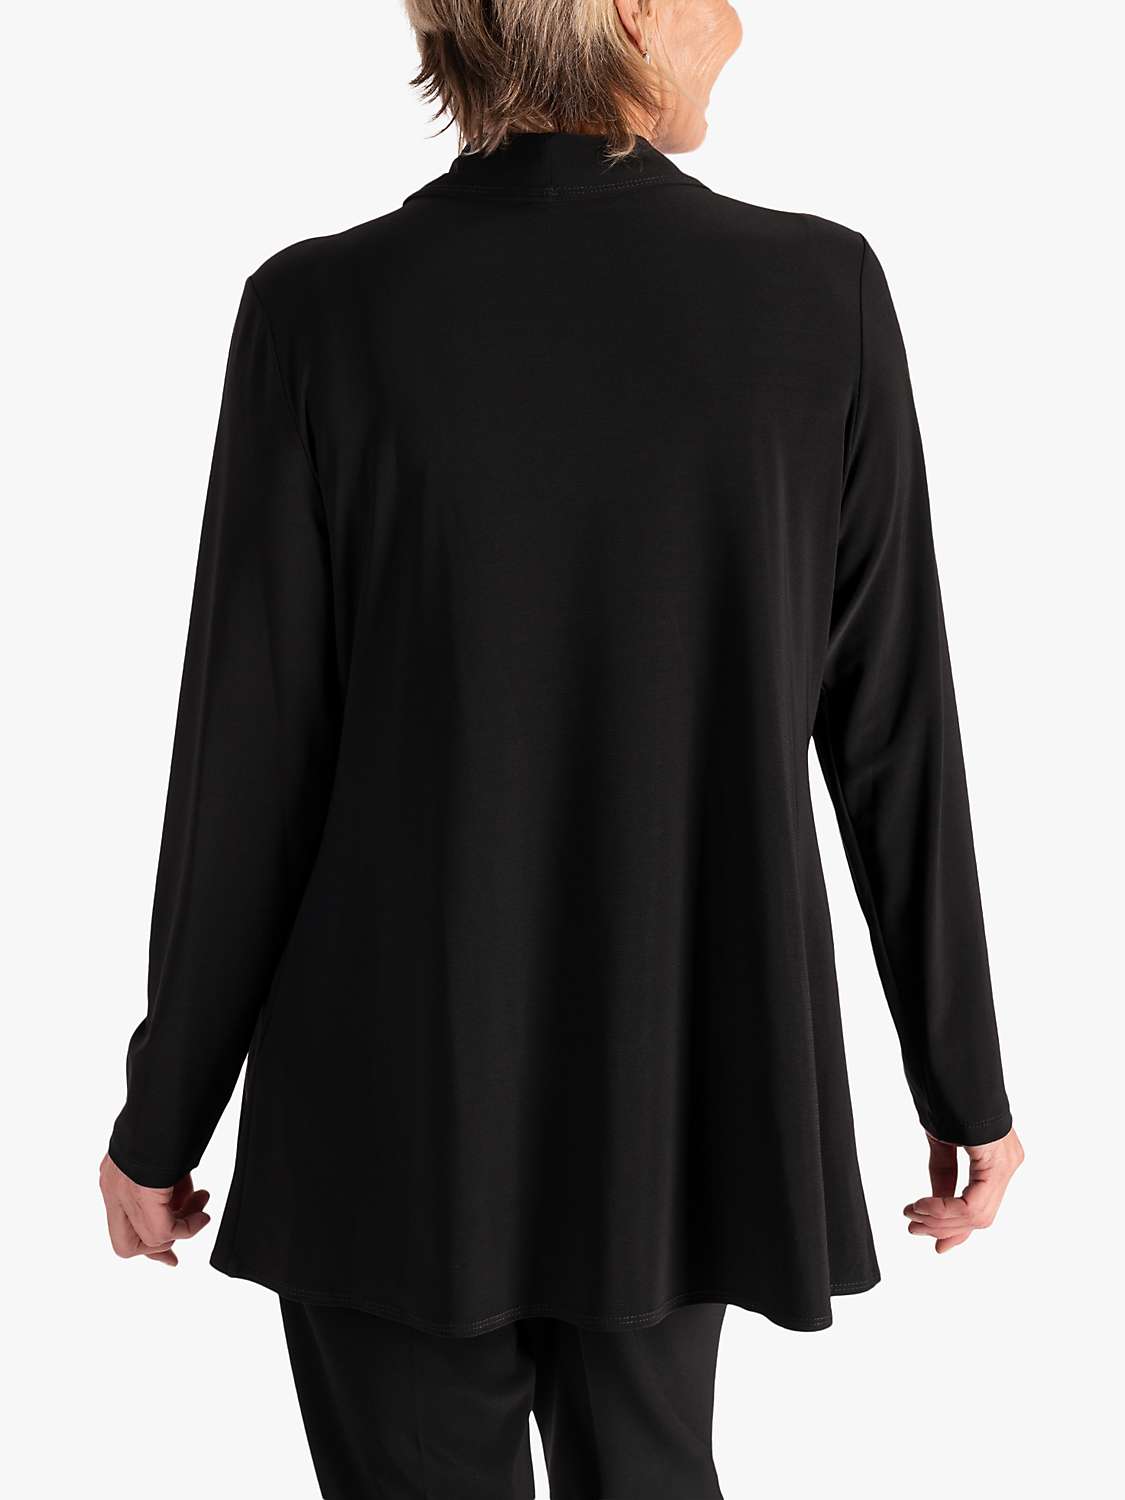 Buy chesca Cowl Neck Layered Tunic Online at johnlewis.com